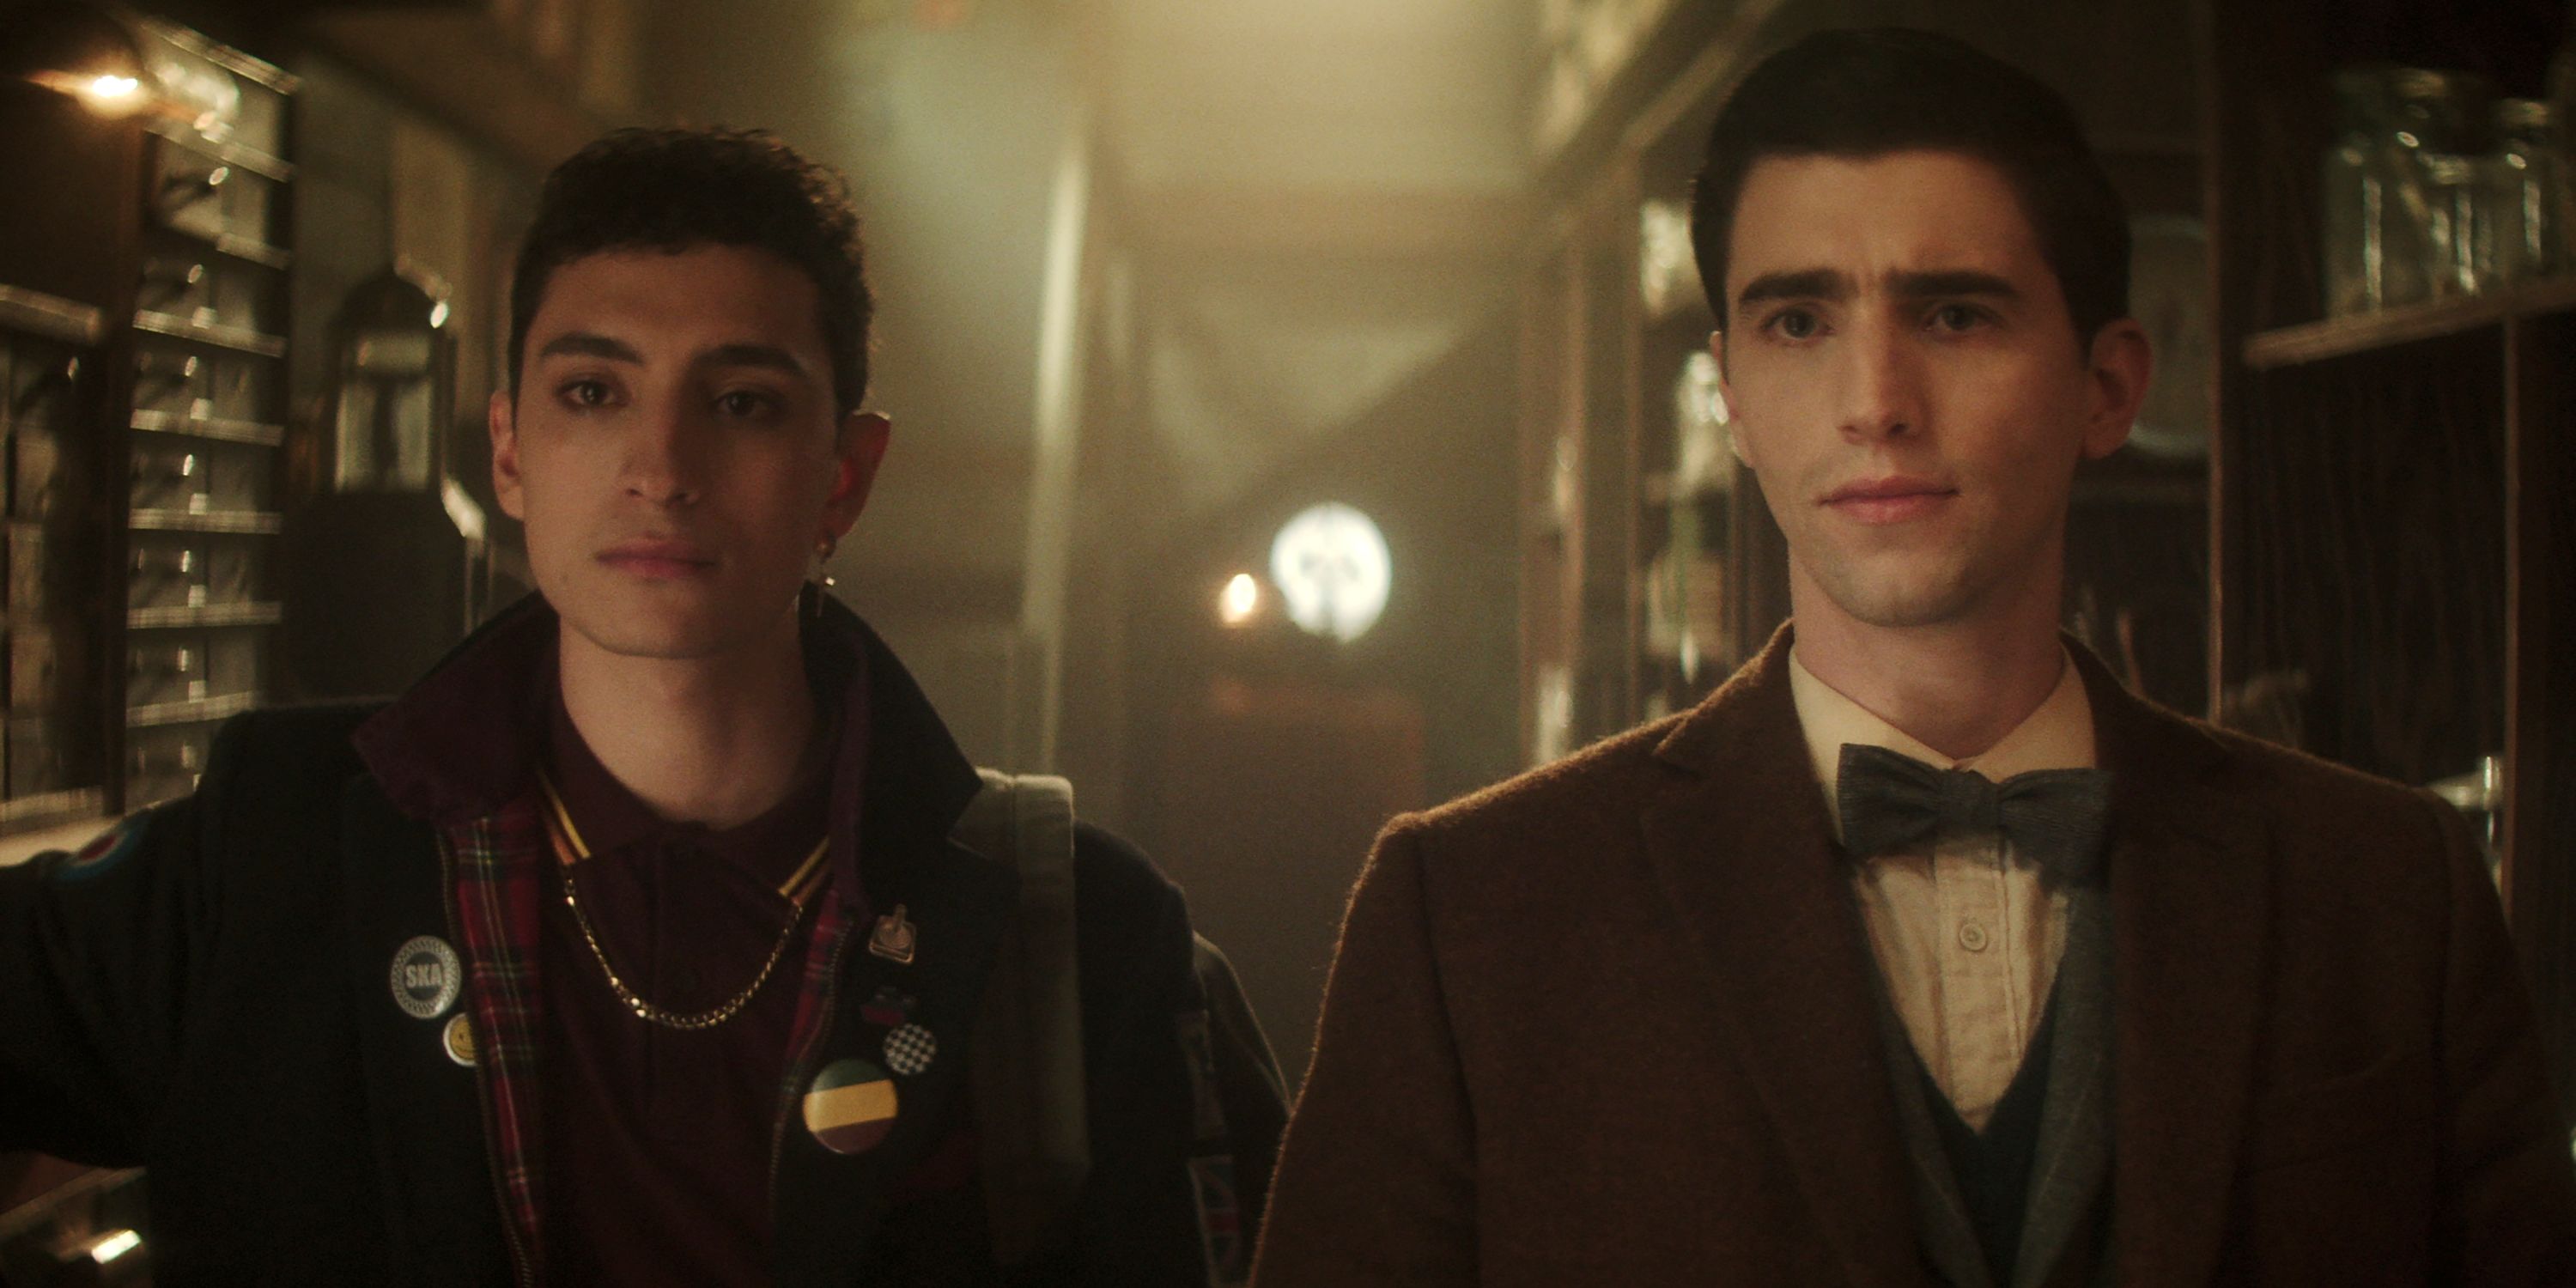 George Rexstrew as Edwin and Jayden Revri as Charles standing side by side in Episode 4 of Season 1 of Dead Boy Detectives